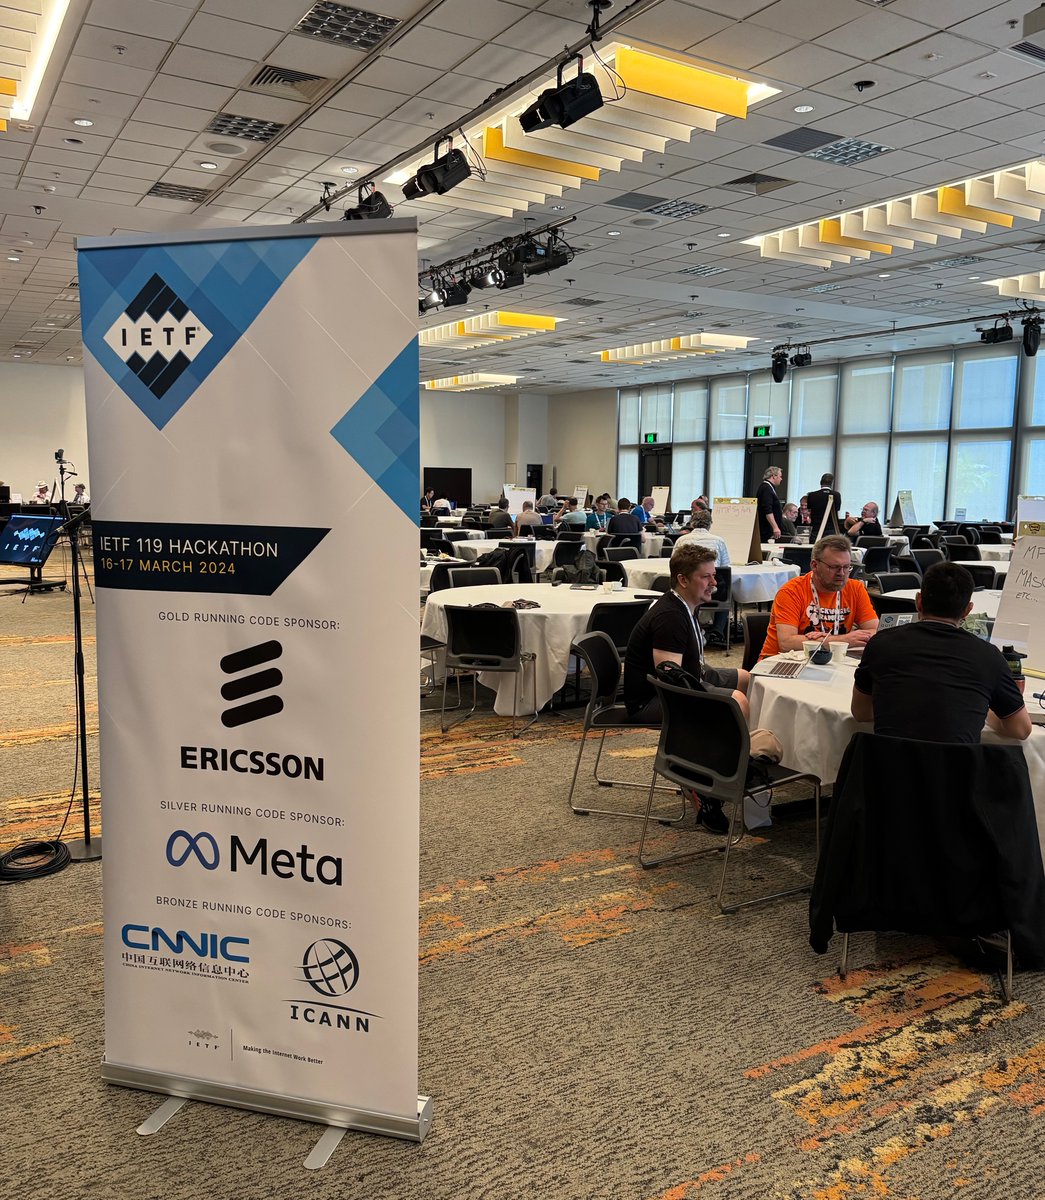 The #IETFHackathon at #IETF119 Brisbane is starting! Participants collaborate and develop utilities, ideas, sample code & solutions that show practical implementations of IETF standards. Thanks #RunningCode sponsors @ericsson, @Meta, CNNIC & @ICANN More: ietf.org/runningcode/